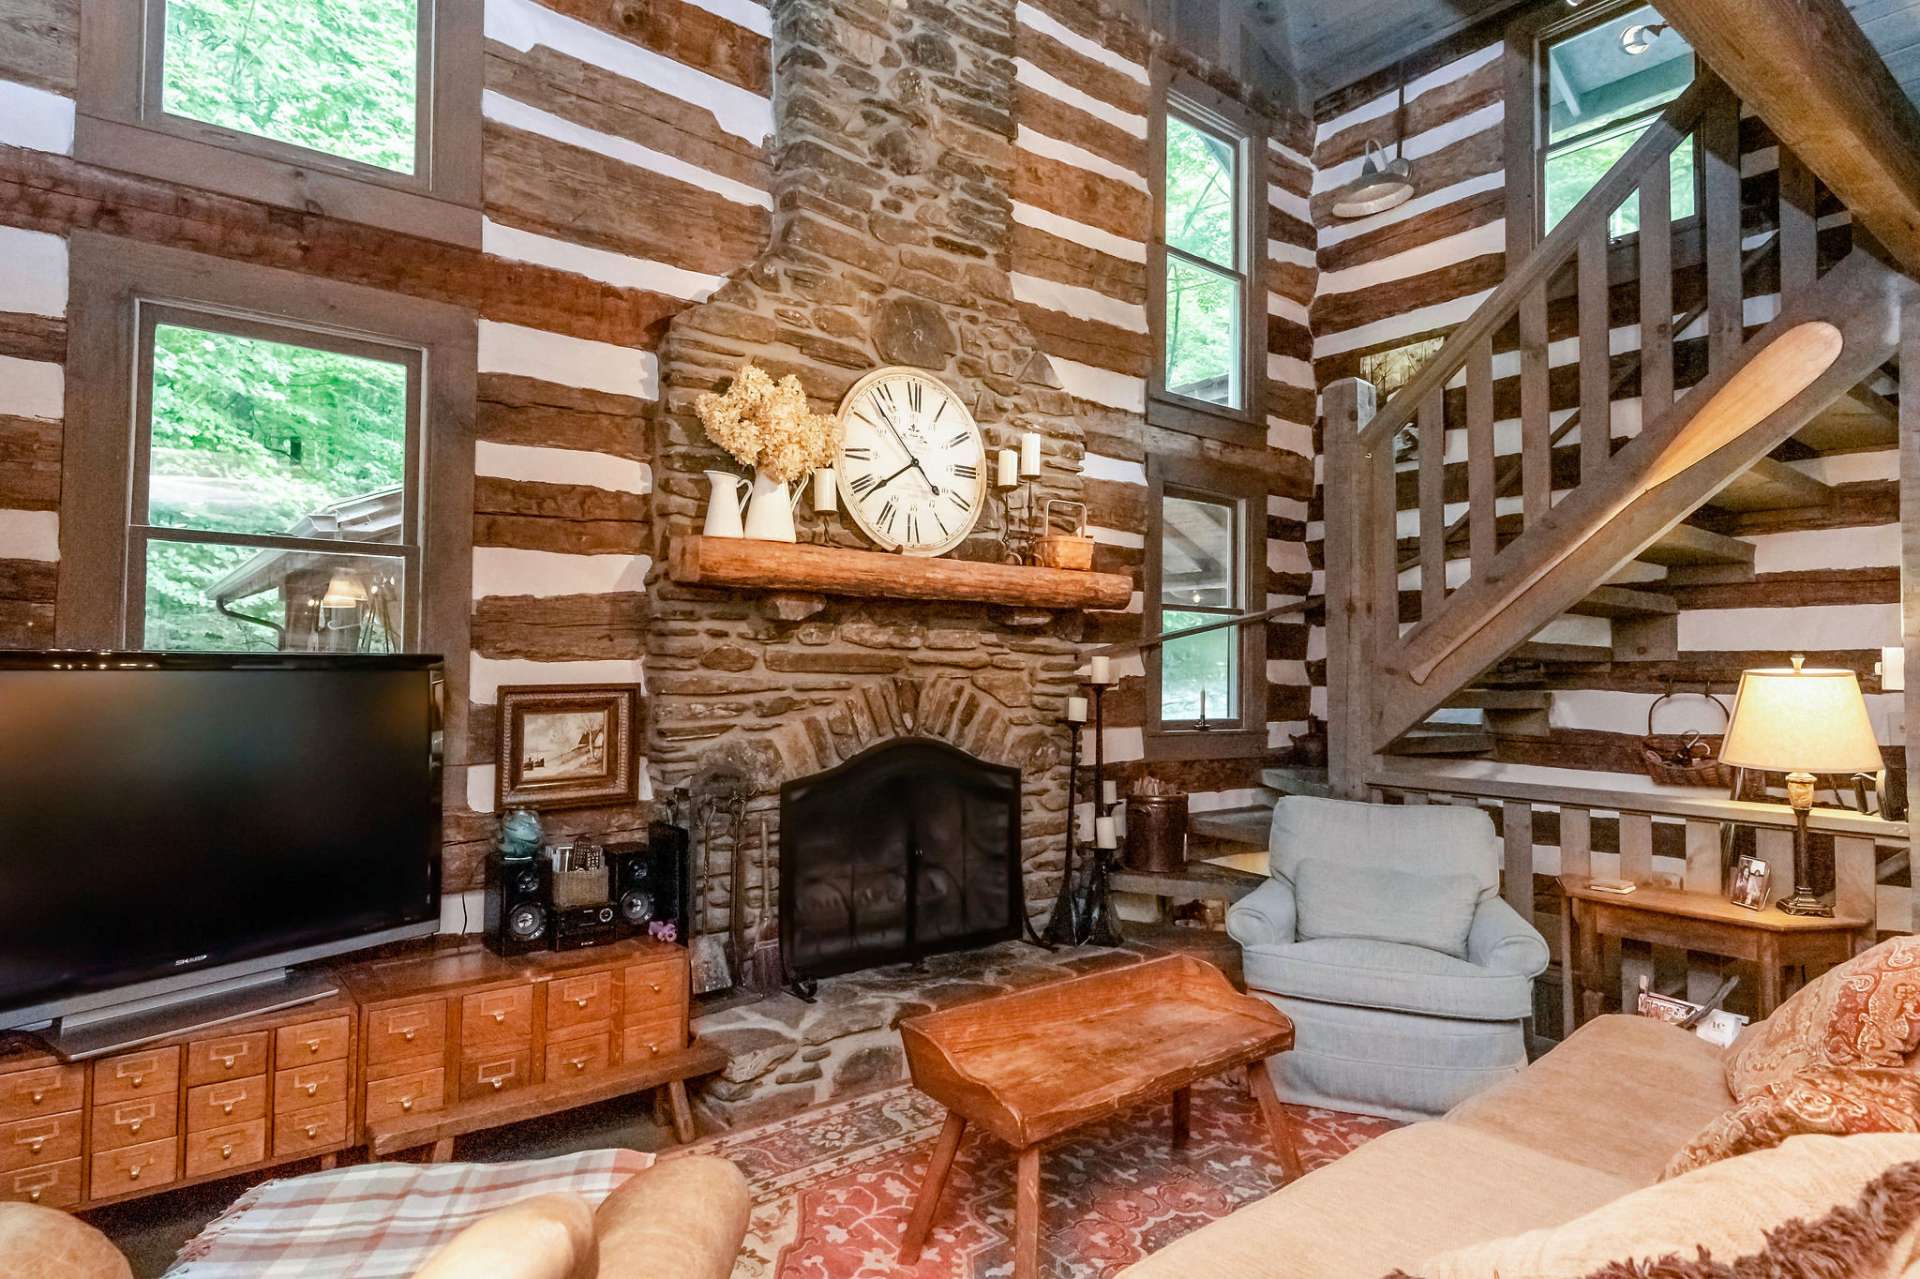 Stay cozy and warm in front of this 2 story native stone wood burning fireplace.